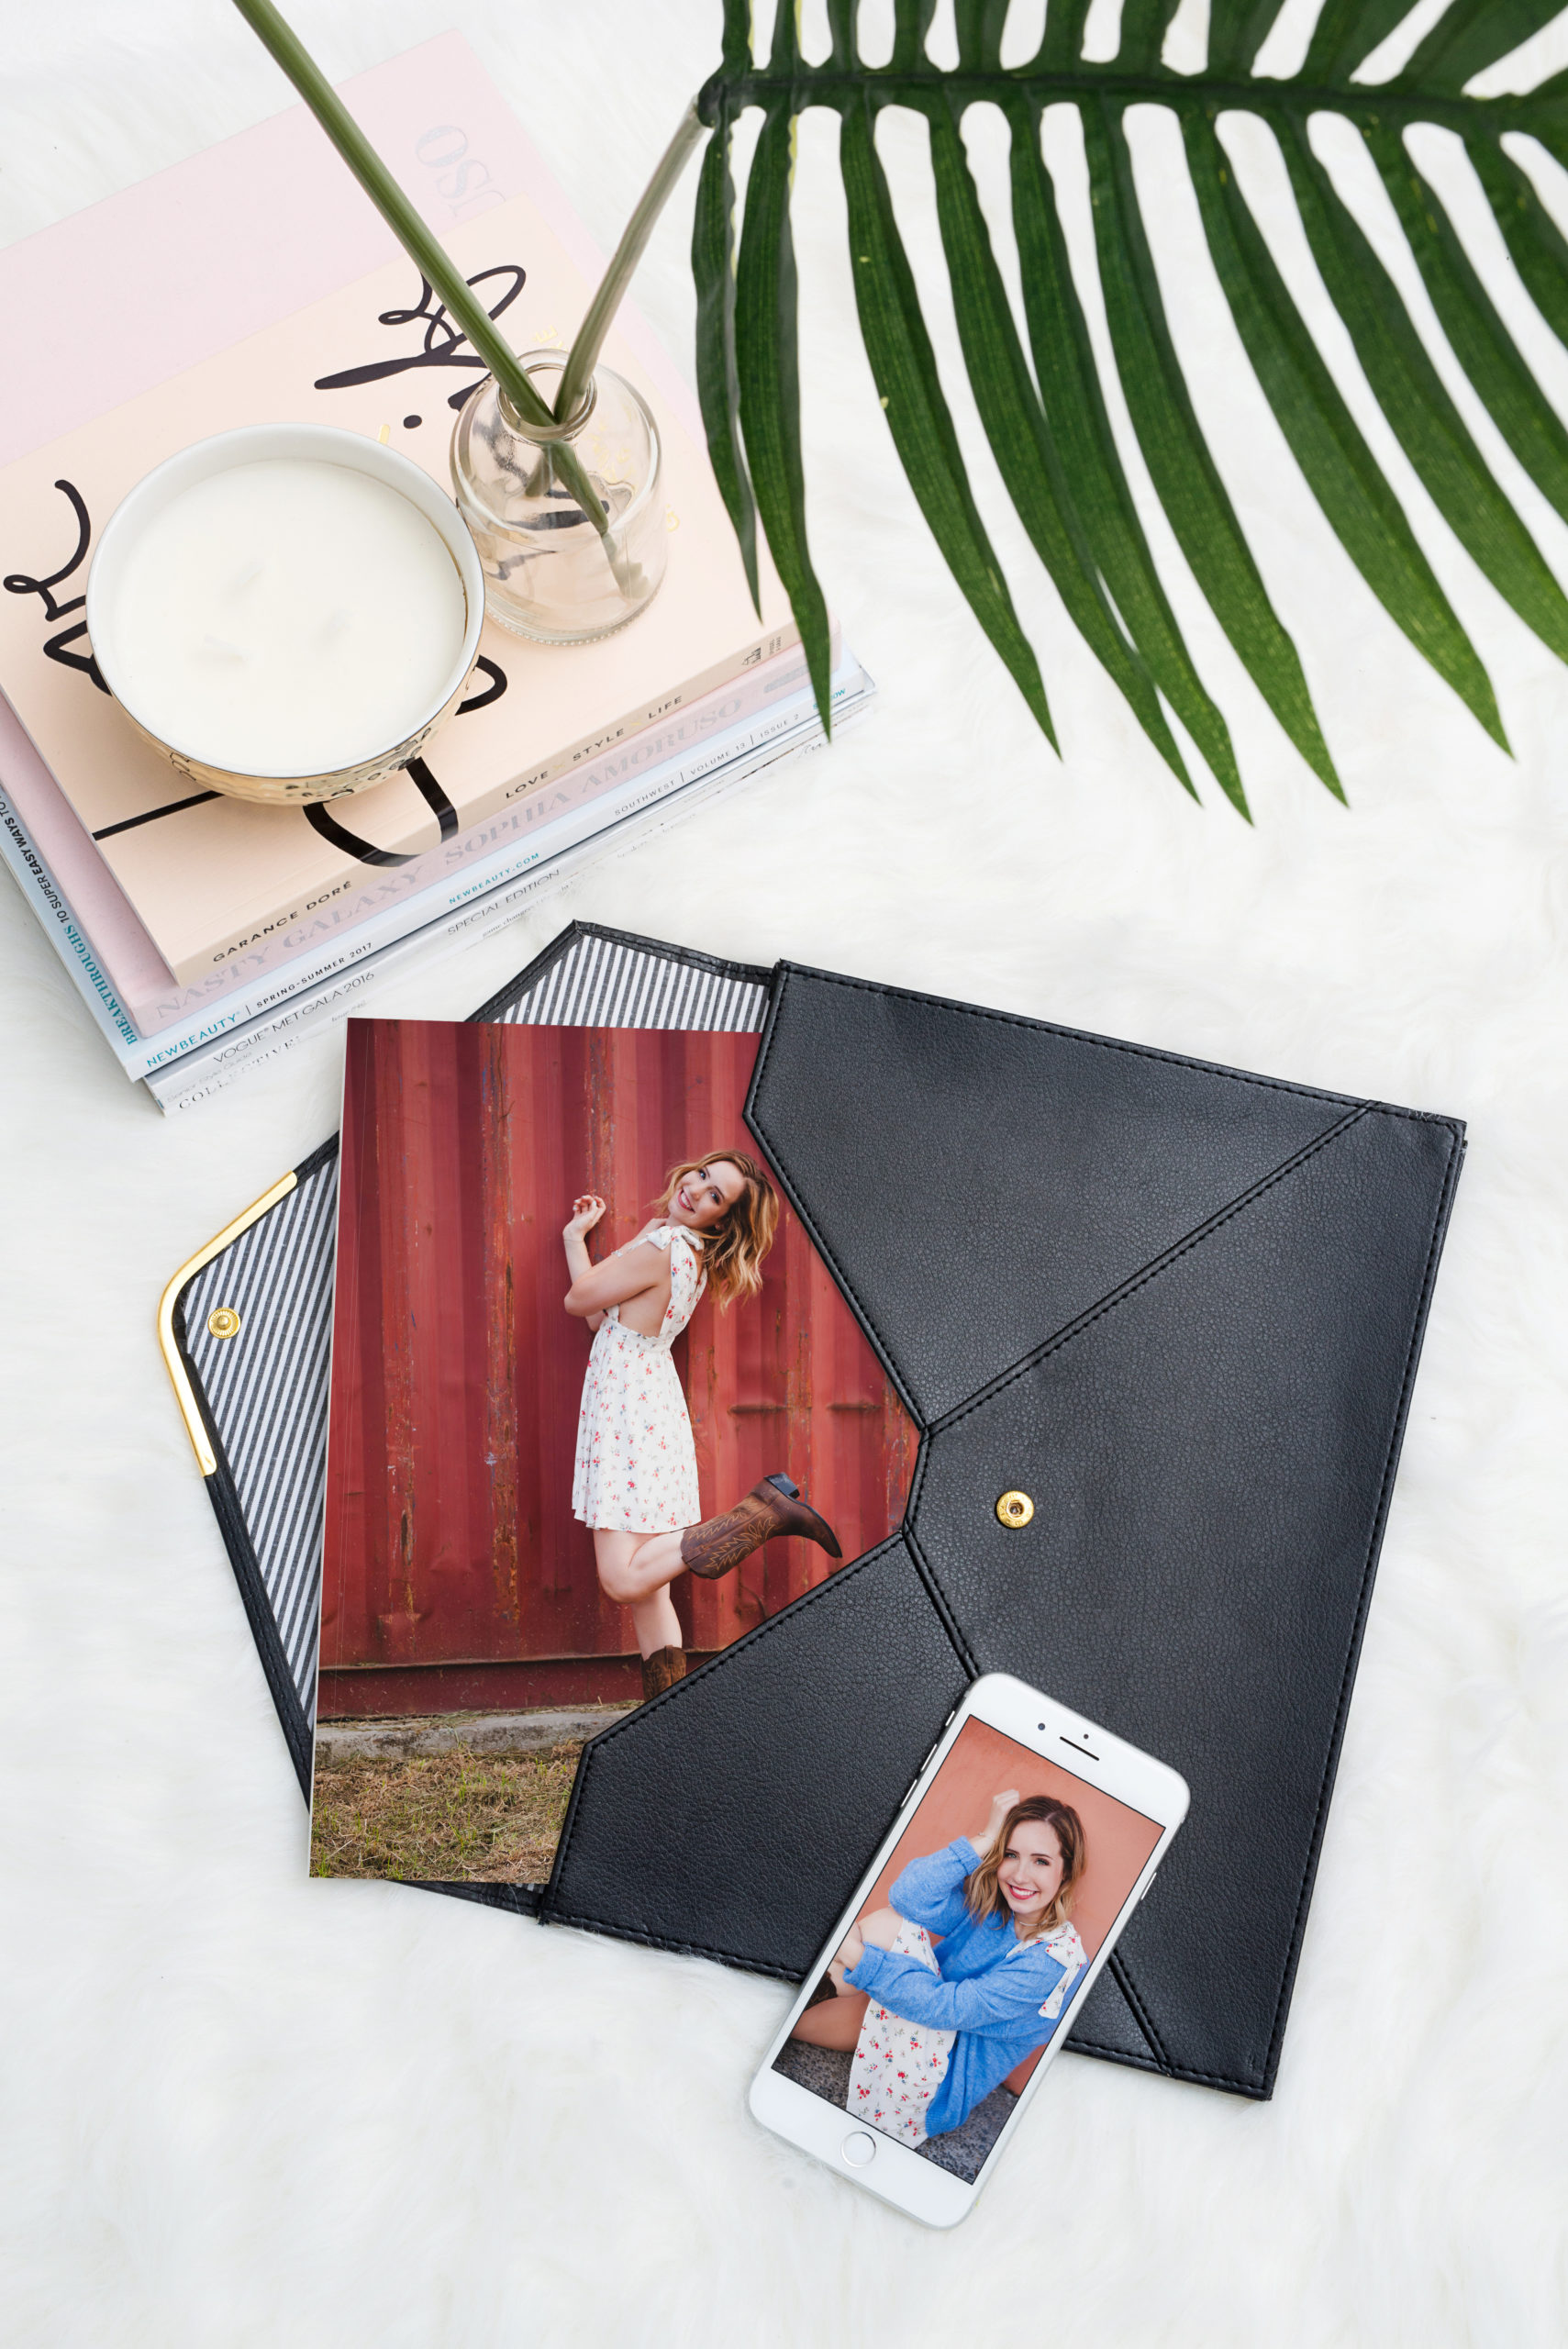 Senior Portrait Prints in Leather Envelope | Why You Should Have A Senior Portrait Session Instead of Just Yearbook Photos | Photographed by Tacoma Senior Photographer Amanda Howse